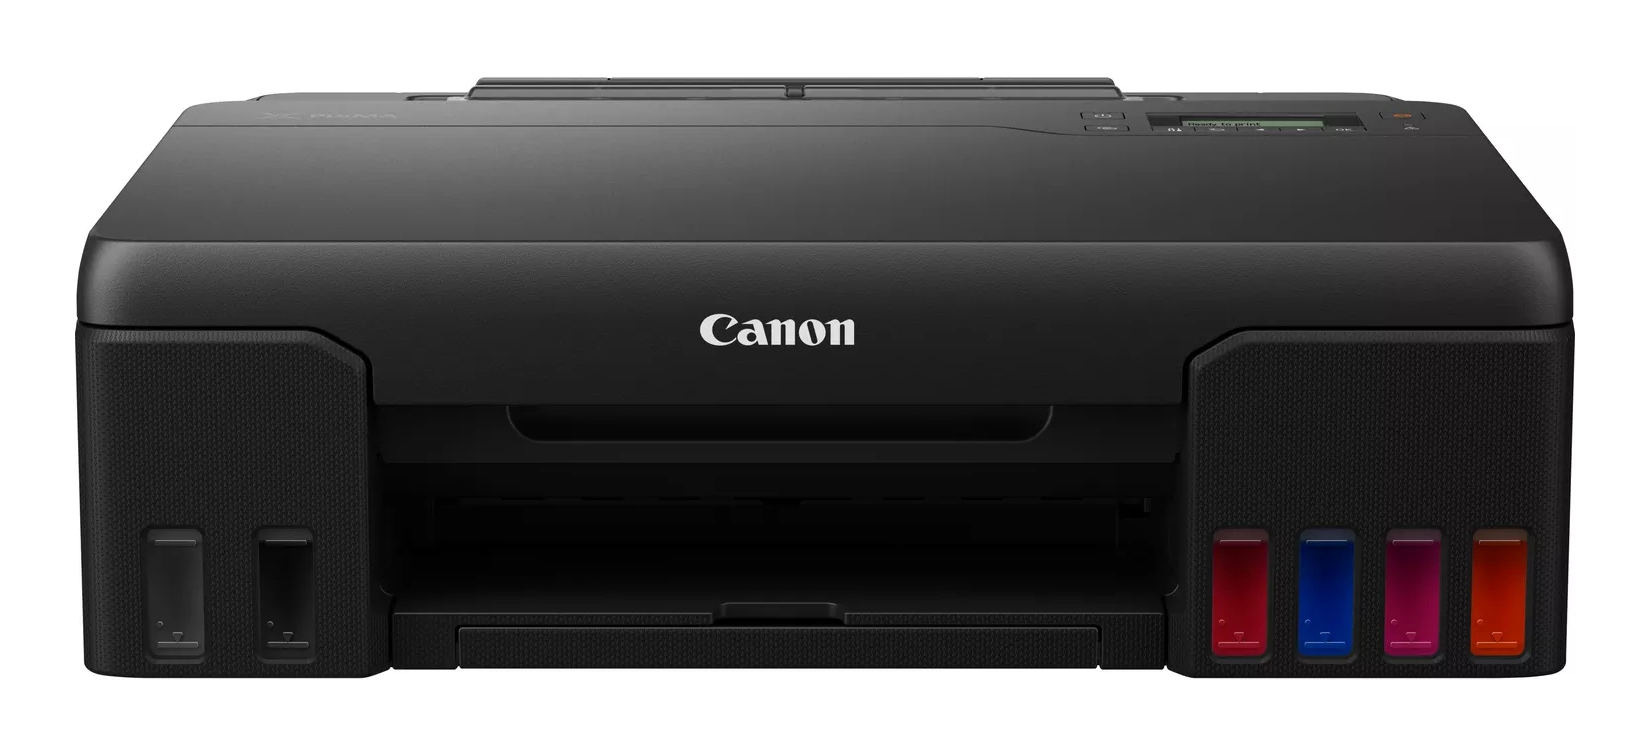 STAMP-INK-COL-A4-WIFI-LAN-3,9PPM-CANON-PIXMA-G550-A4